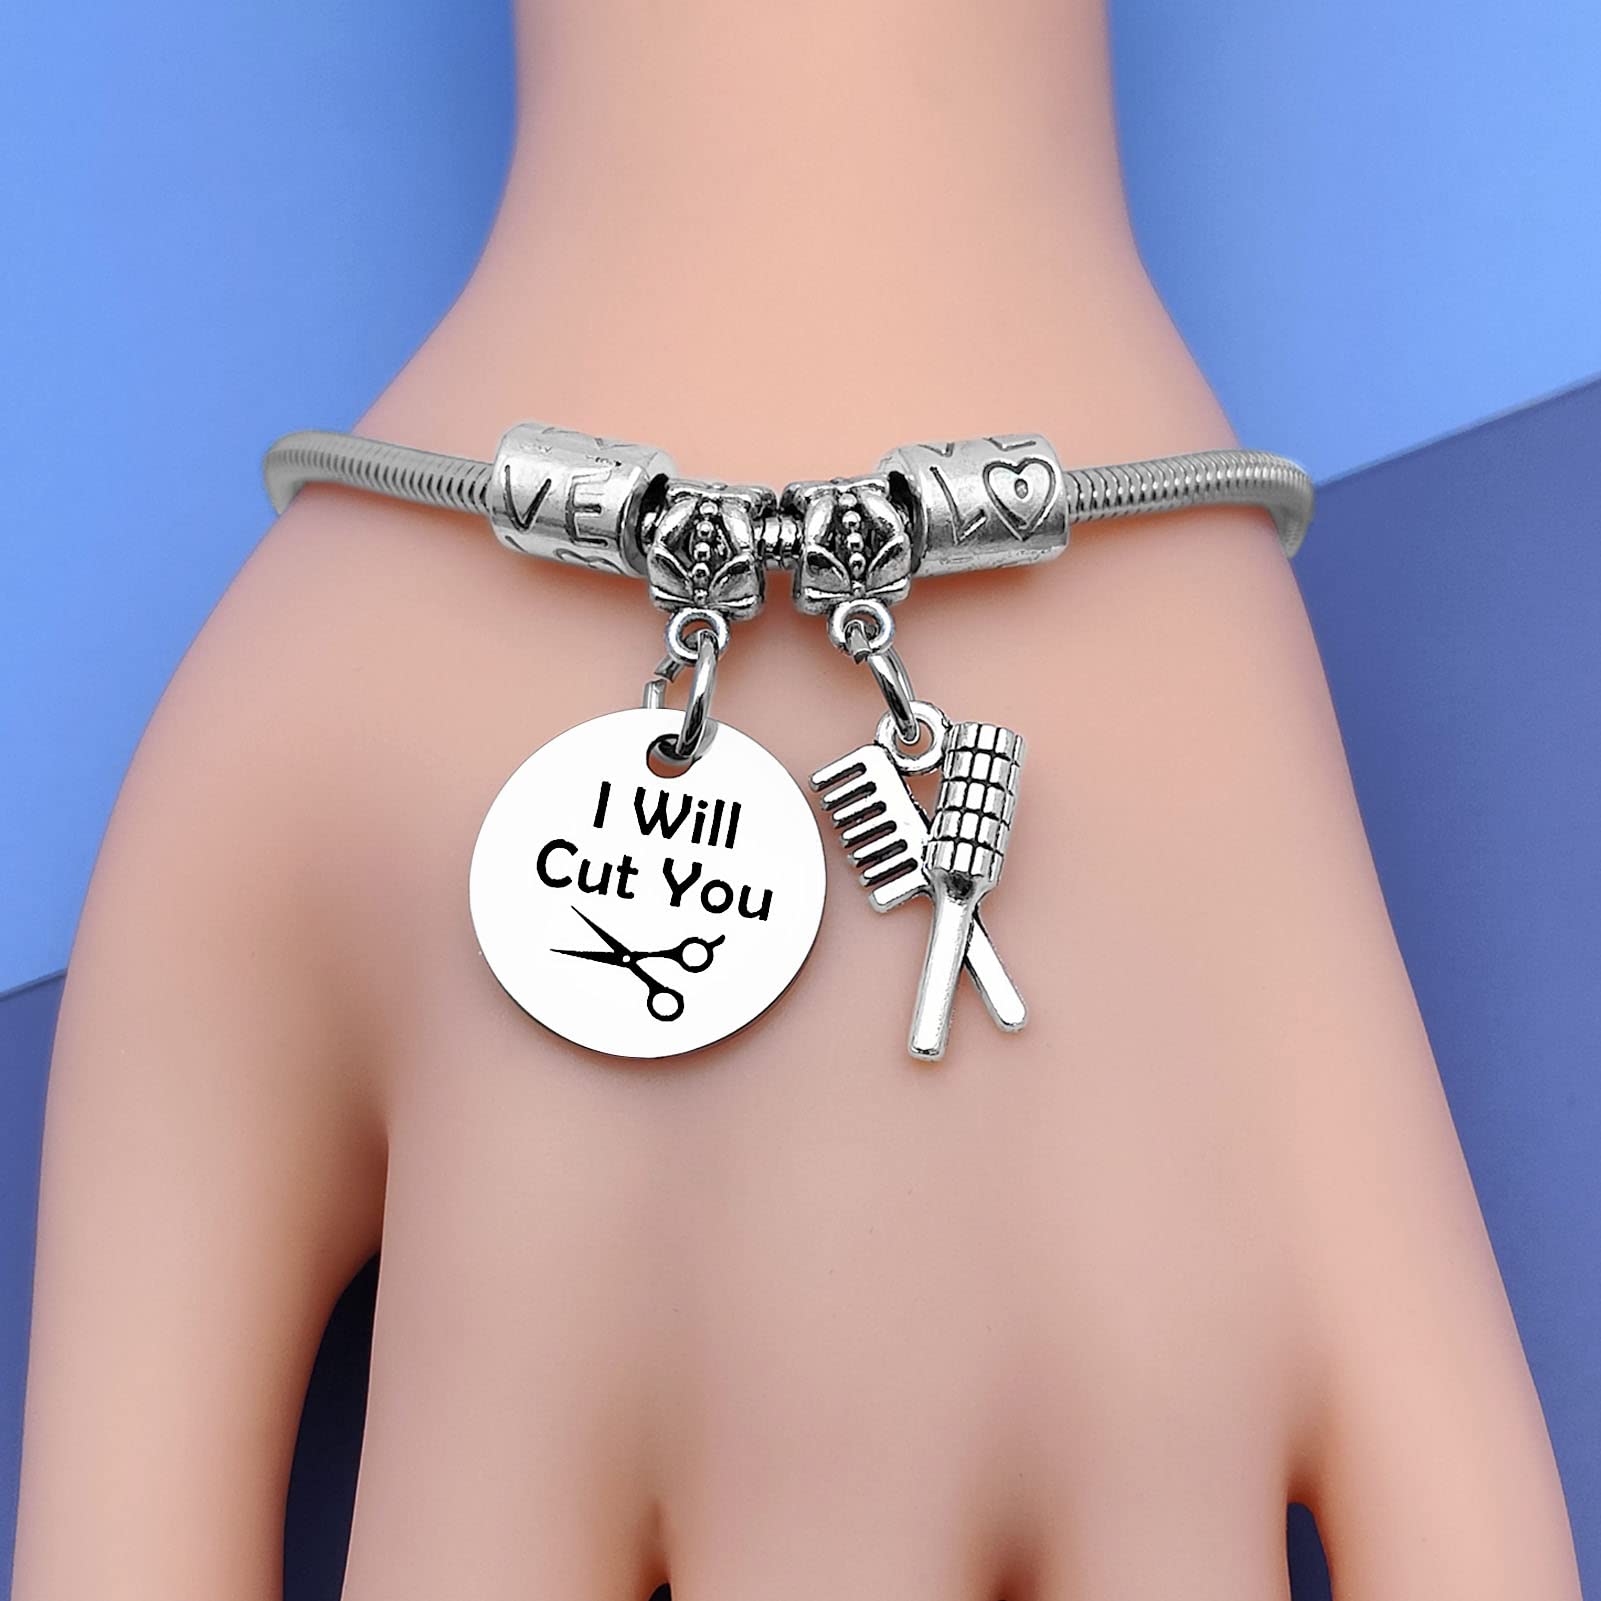 Hairdresser Gift for Women Bracelet Jewelry Christmas Gift for Salon Owner Barber Hair Stylist Gifts Beauty Salon Gifts Cosmetology Graduation Gift for Friends Cosmetology Student Hair Stylist Gift